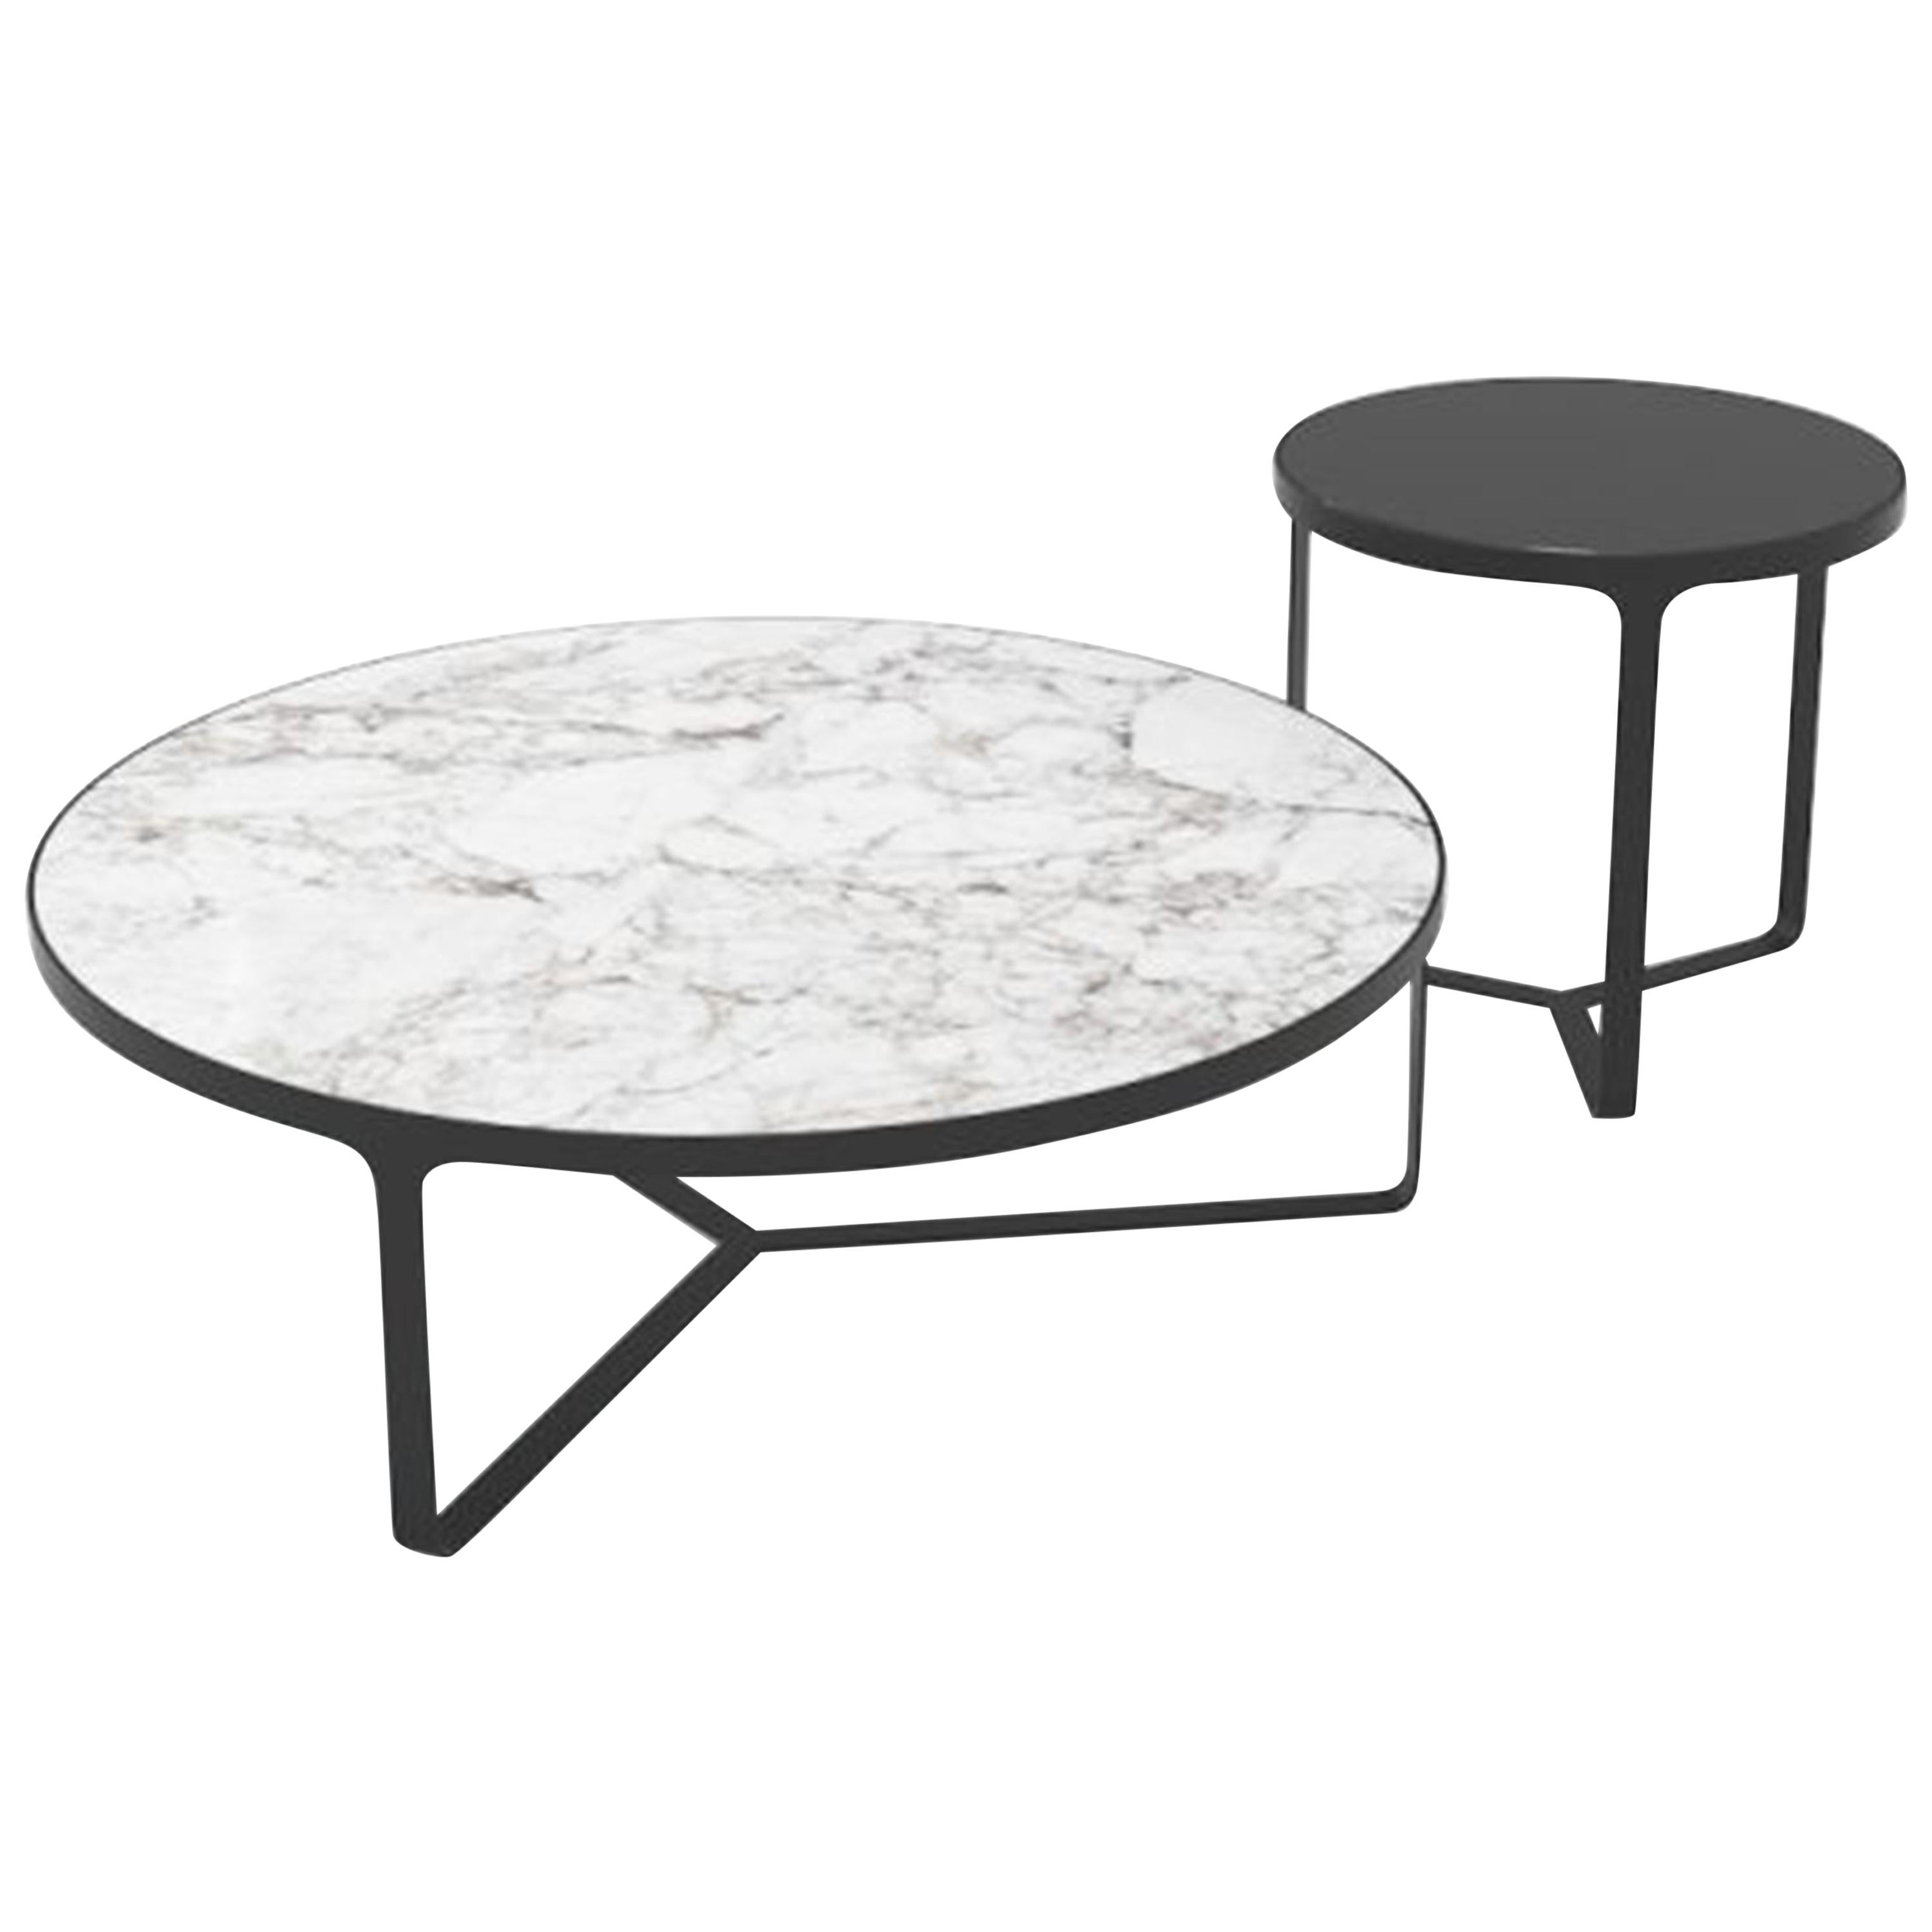 Tacchini Set of Cage Tables in Marble Designed Gordon Guillaumier